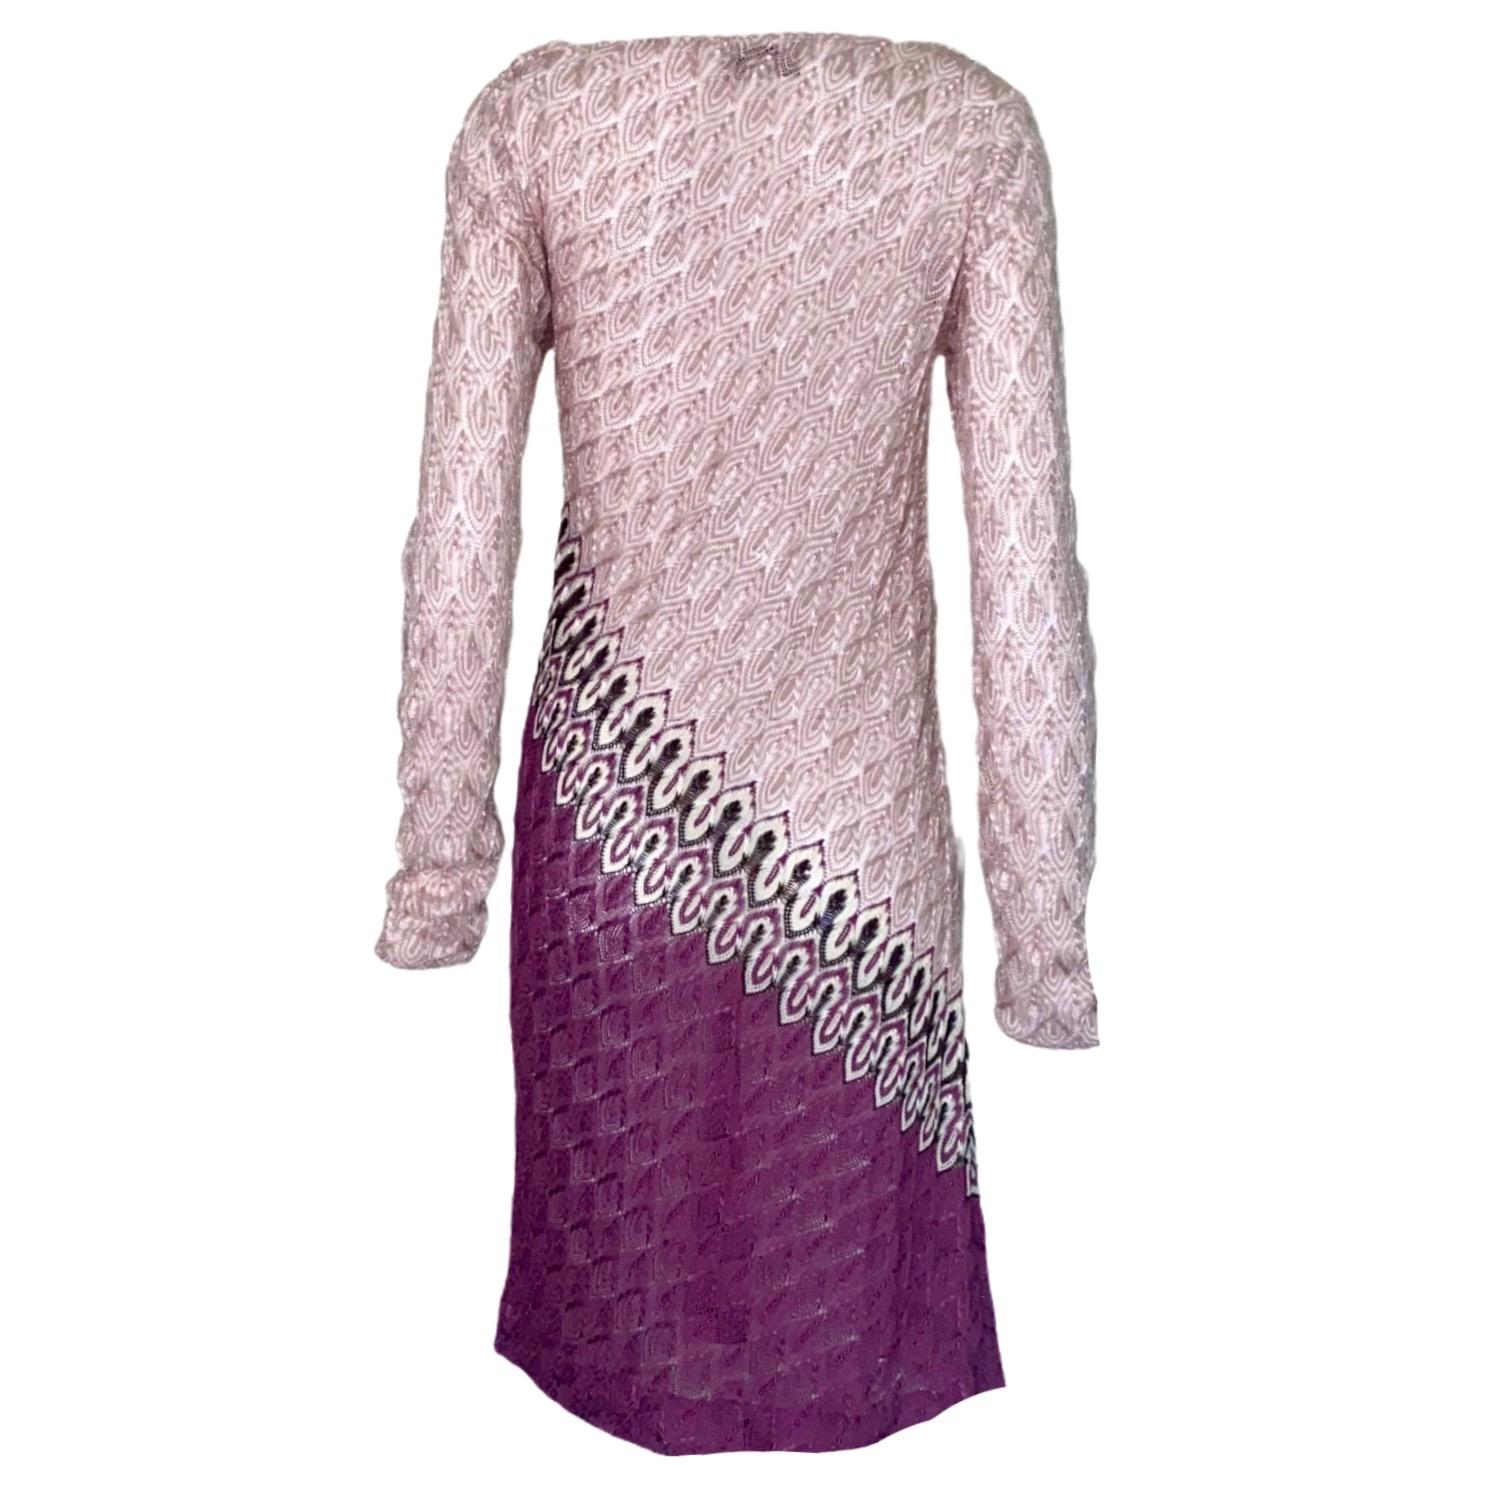 Beautiful MISSONI dress
MISSONI Main line
Signature MISSONI chevron signature knit
Simply slips on
Crochet-knit details - so beautiful!
Dry Clean only
Made in Italy
Size 42
Comes with belt in matching knit pouch
New, unworn
RRP 2899$



